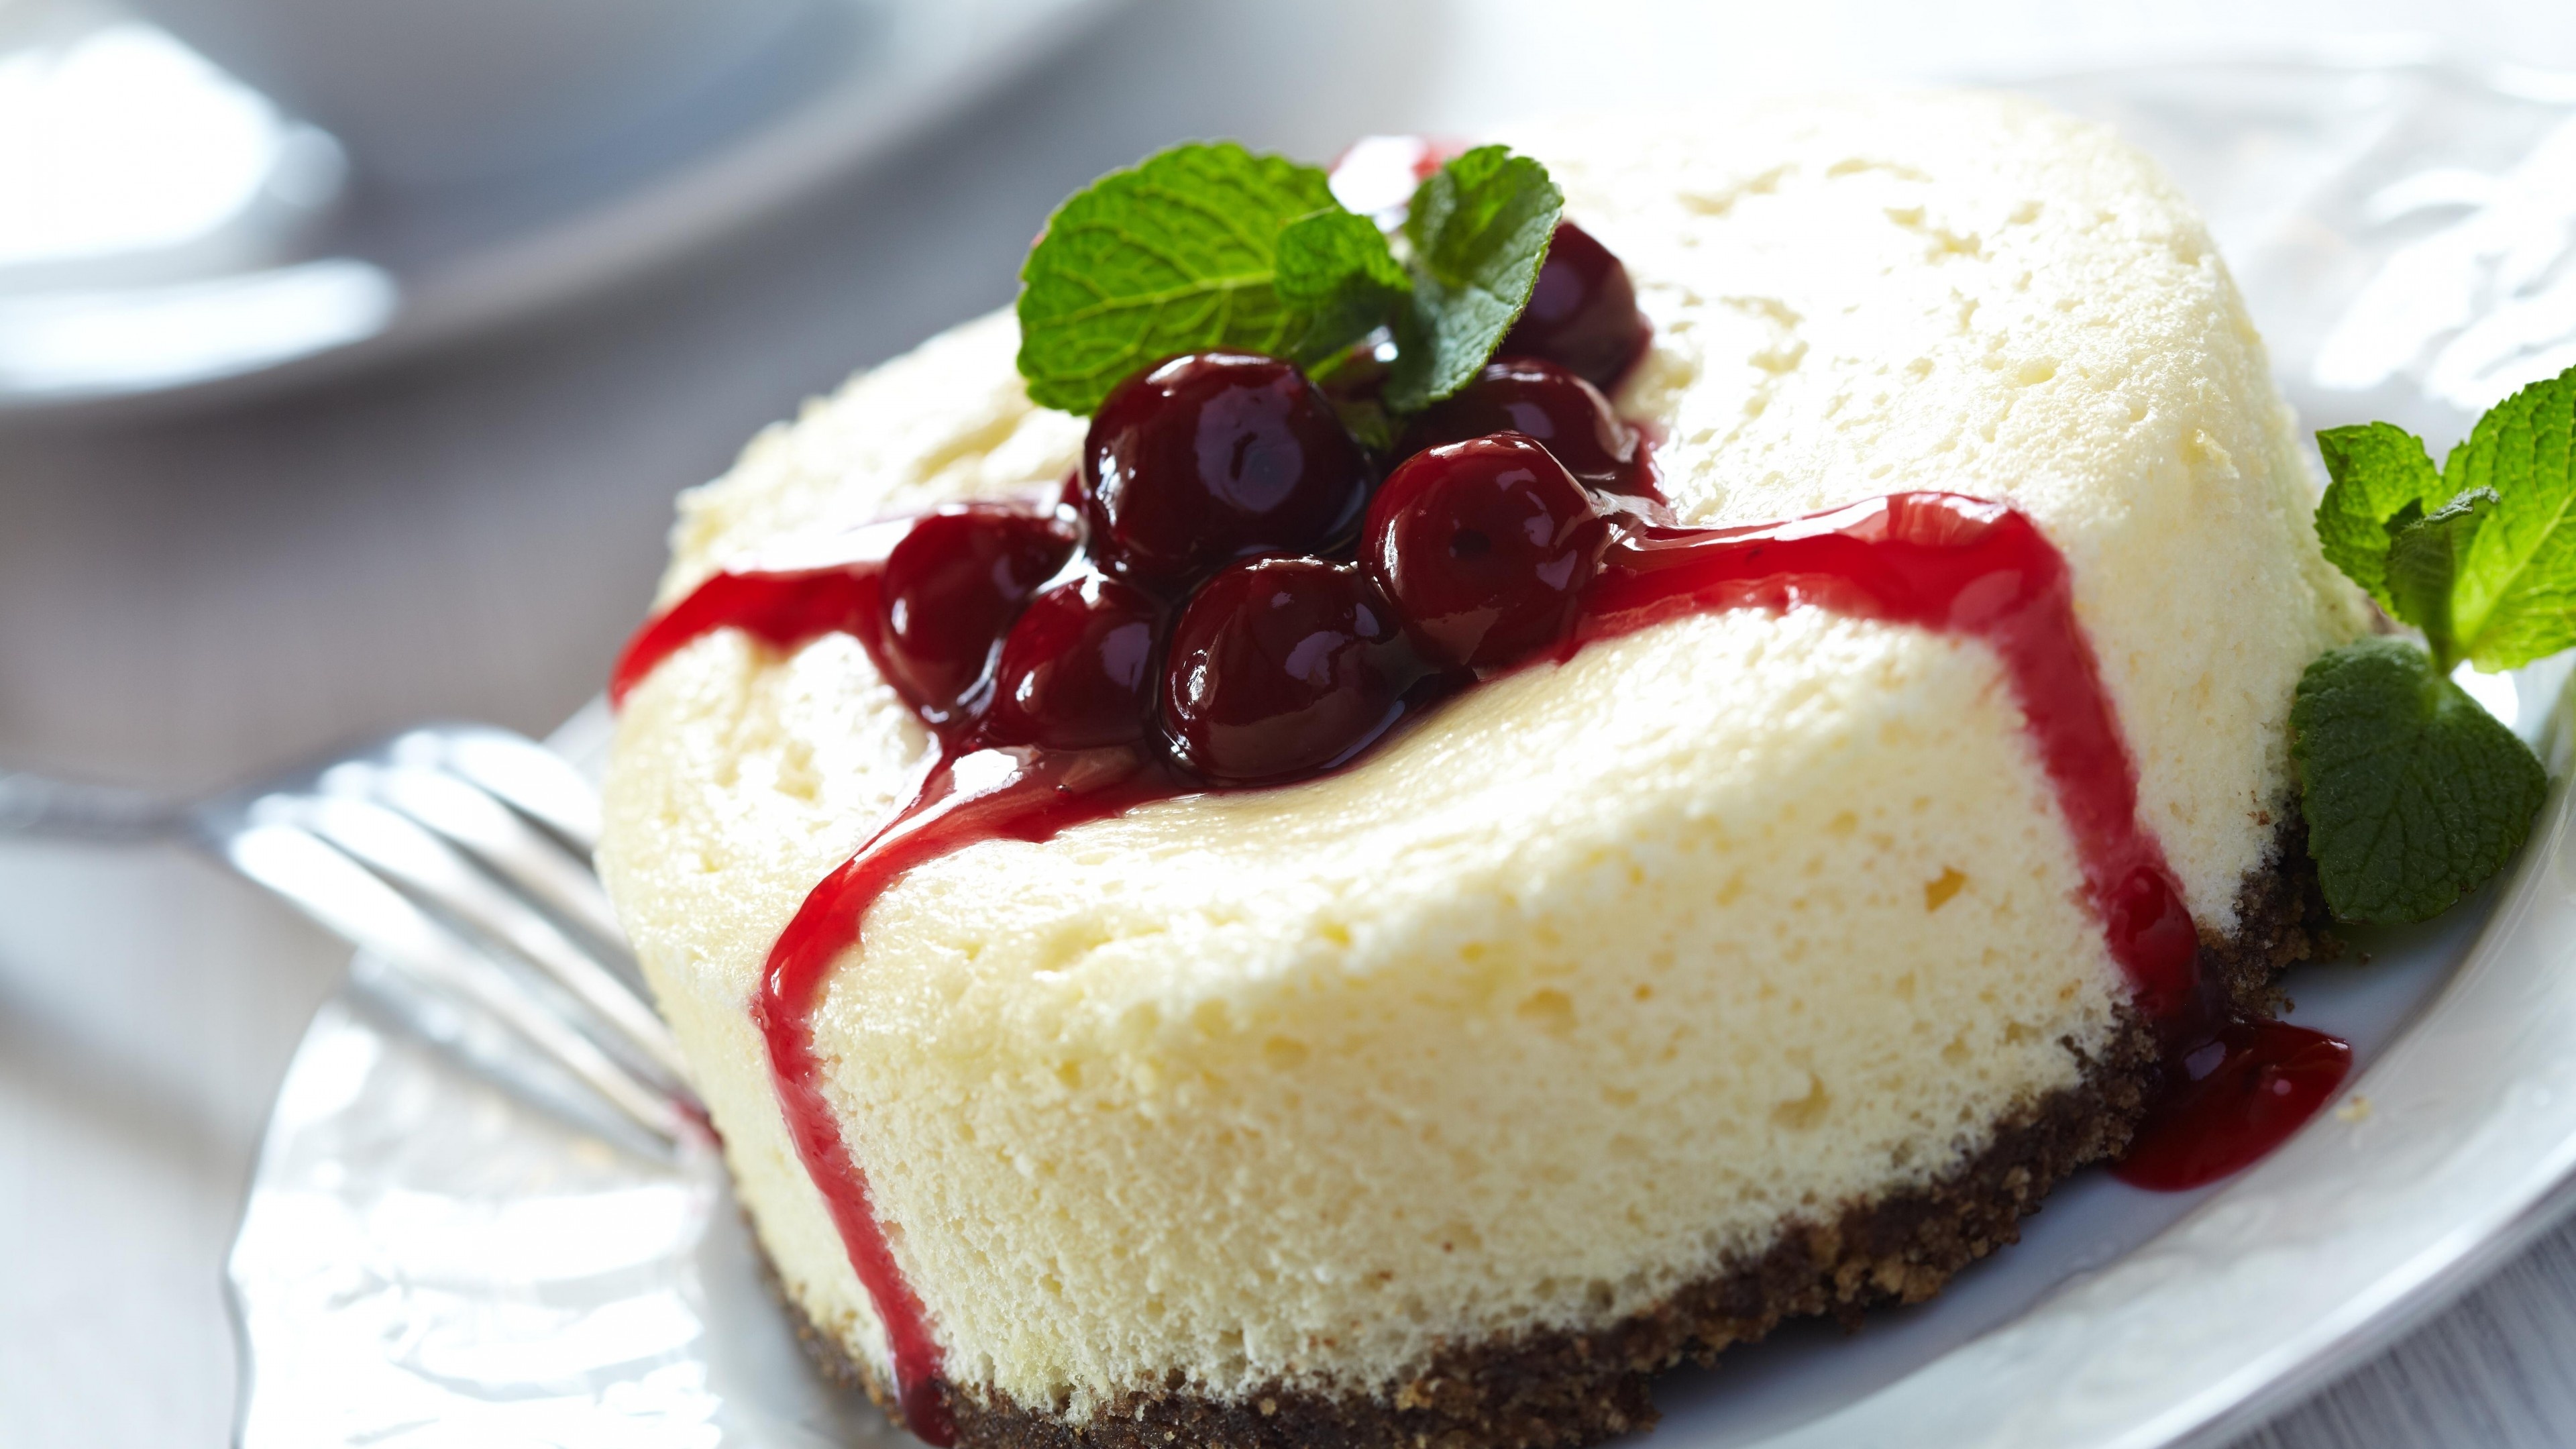 Cheesecake: Essentially rich cheese and egg custard baked over a graham cracker crust. 3840x2160 4K Wallpaper.